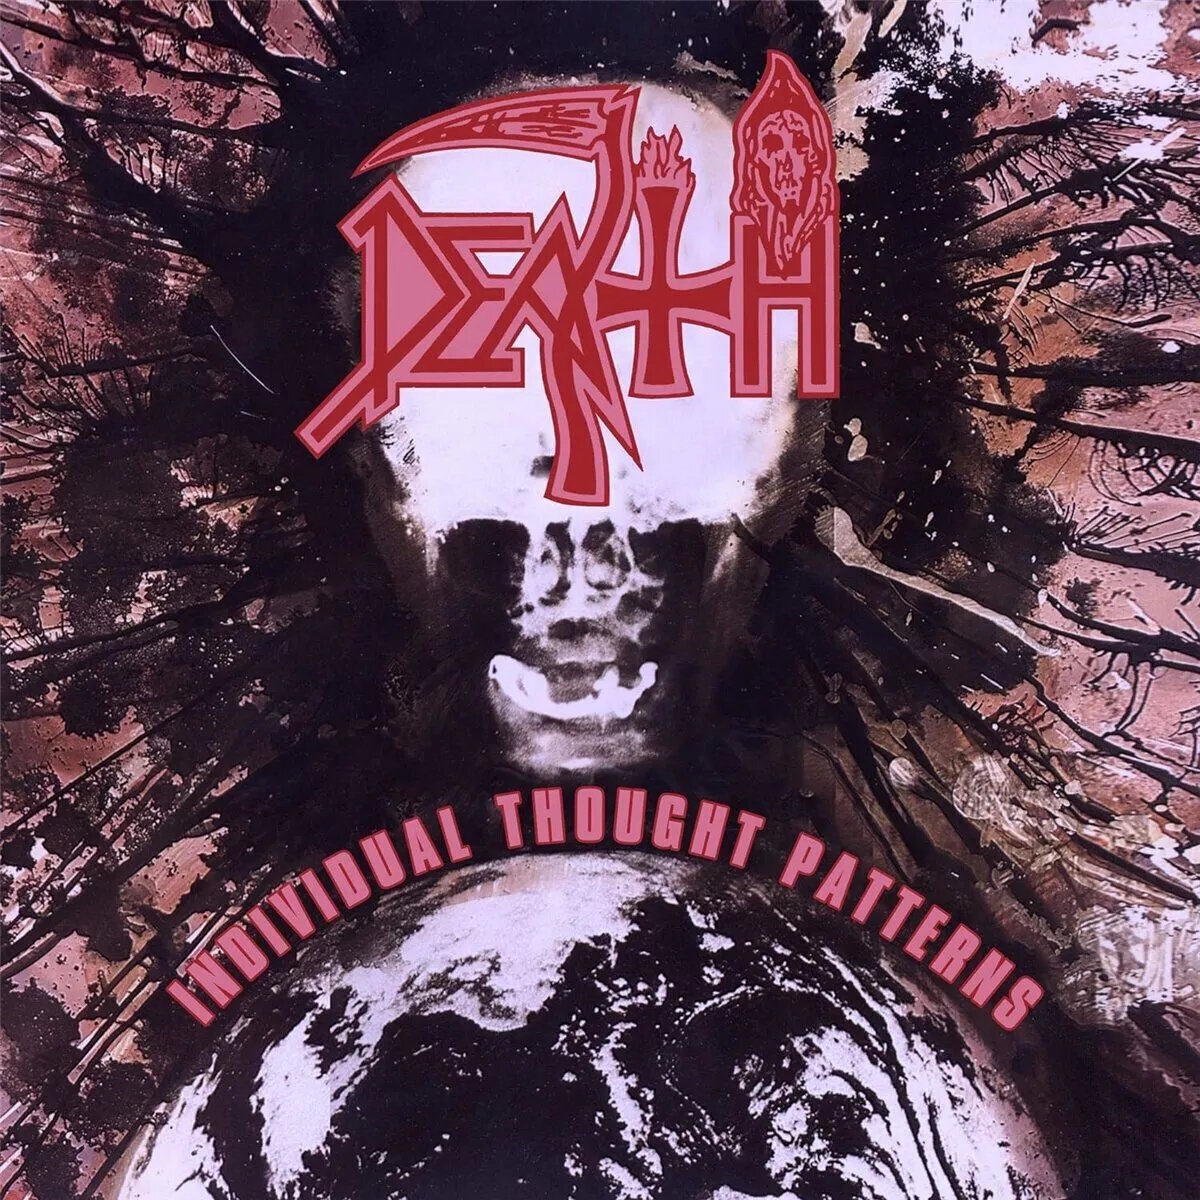 Disque vinyle Death - Individual Thought Patterns (Tri Colour Merge Splatter Coloured) (Deluxe Edition) (Limited Edition) (Reissue) (Remastered) (LP)